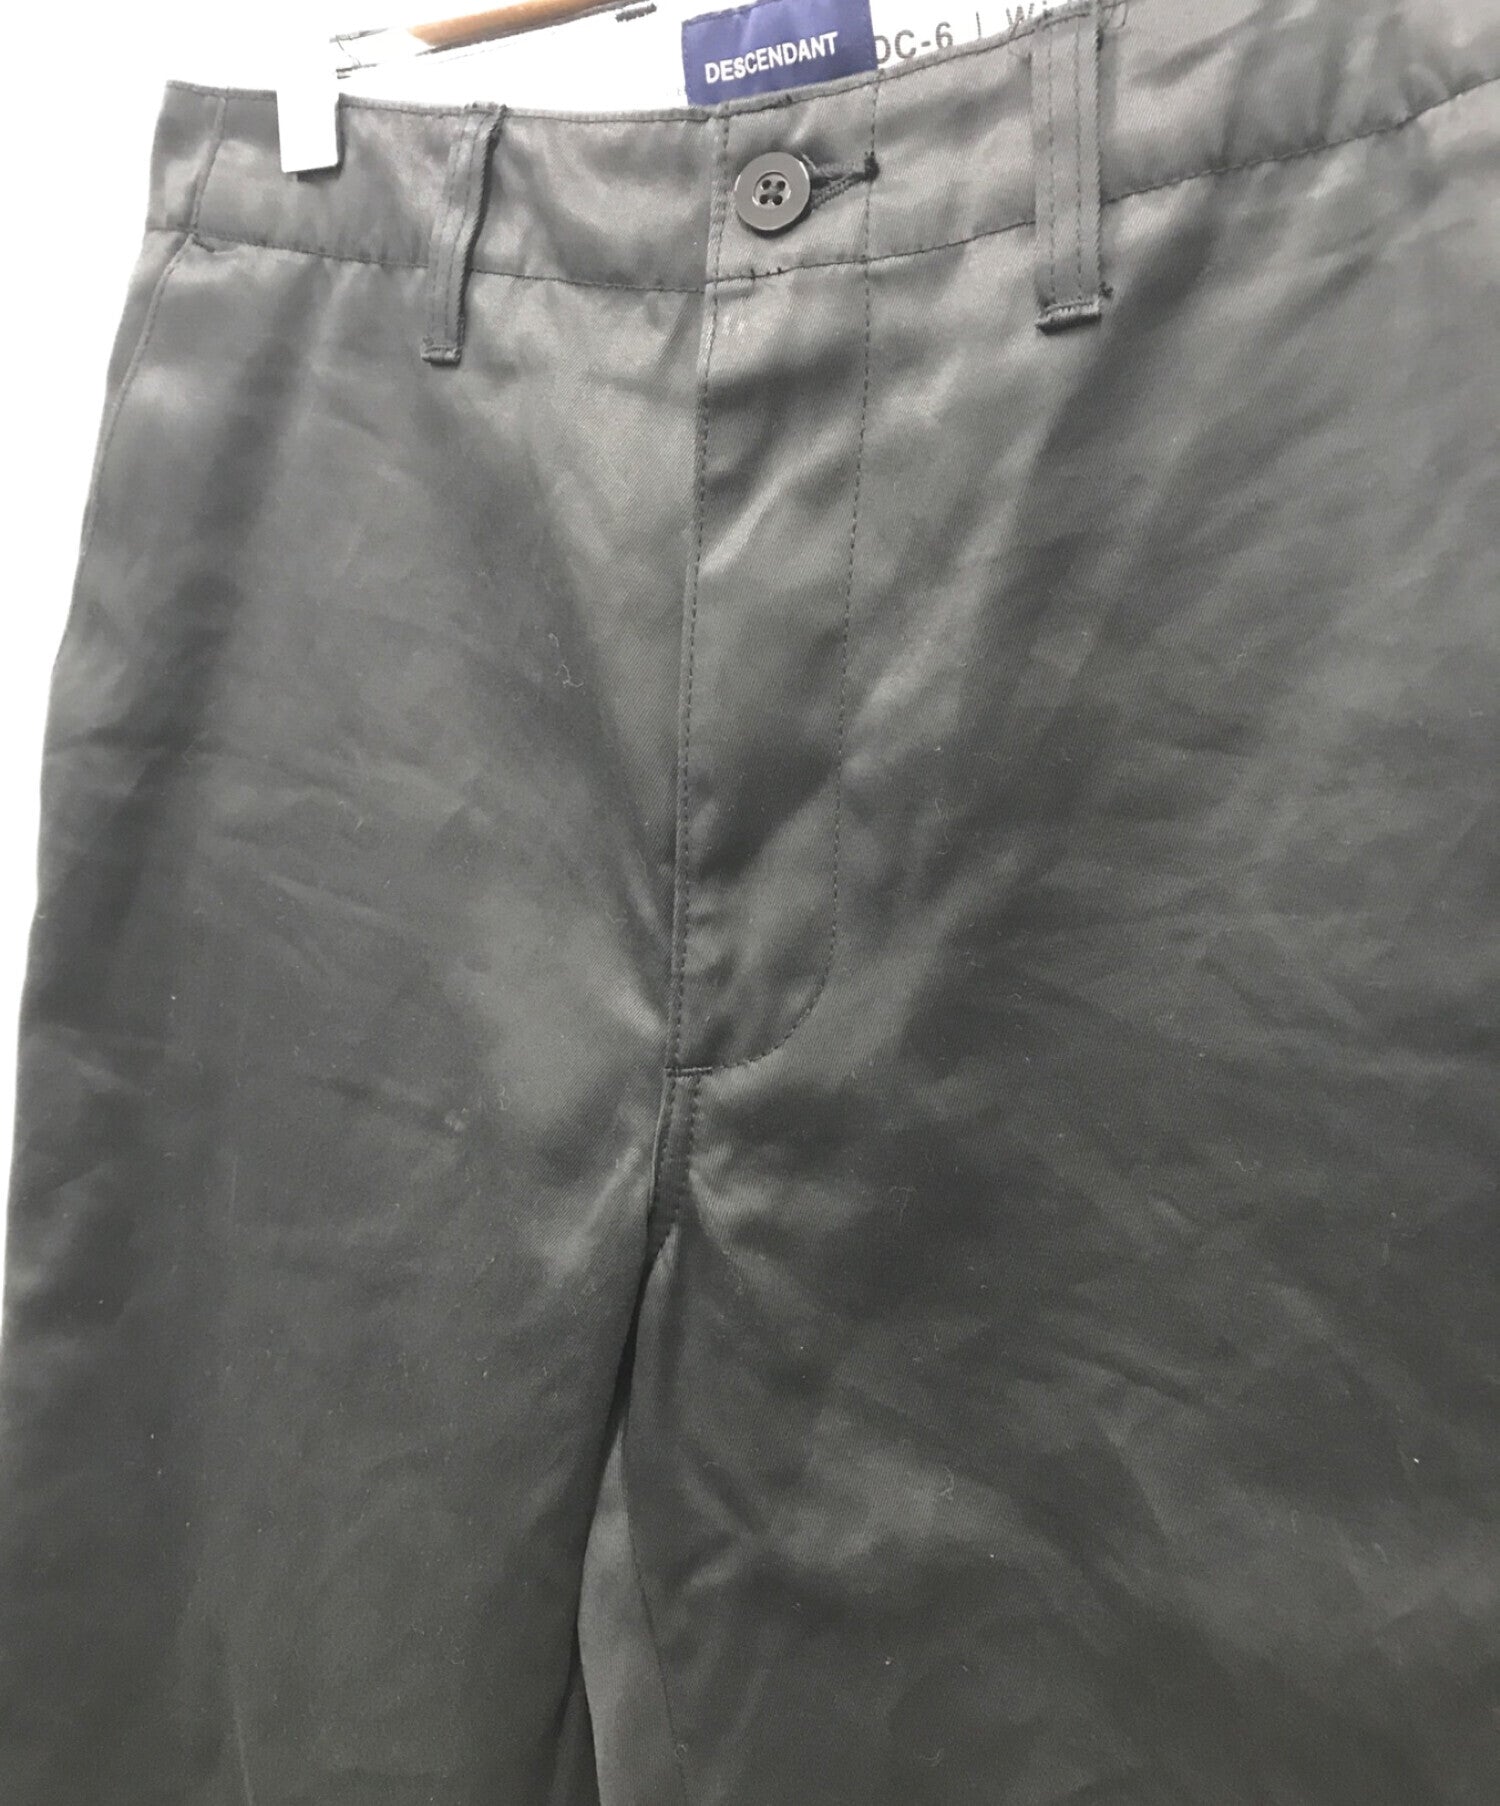 DESCENDANT Cotton Twill Wide Tapered Pants / DC-6 COTTON TWILL